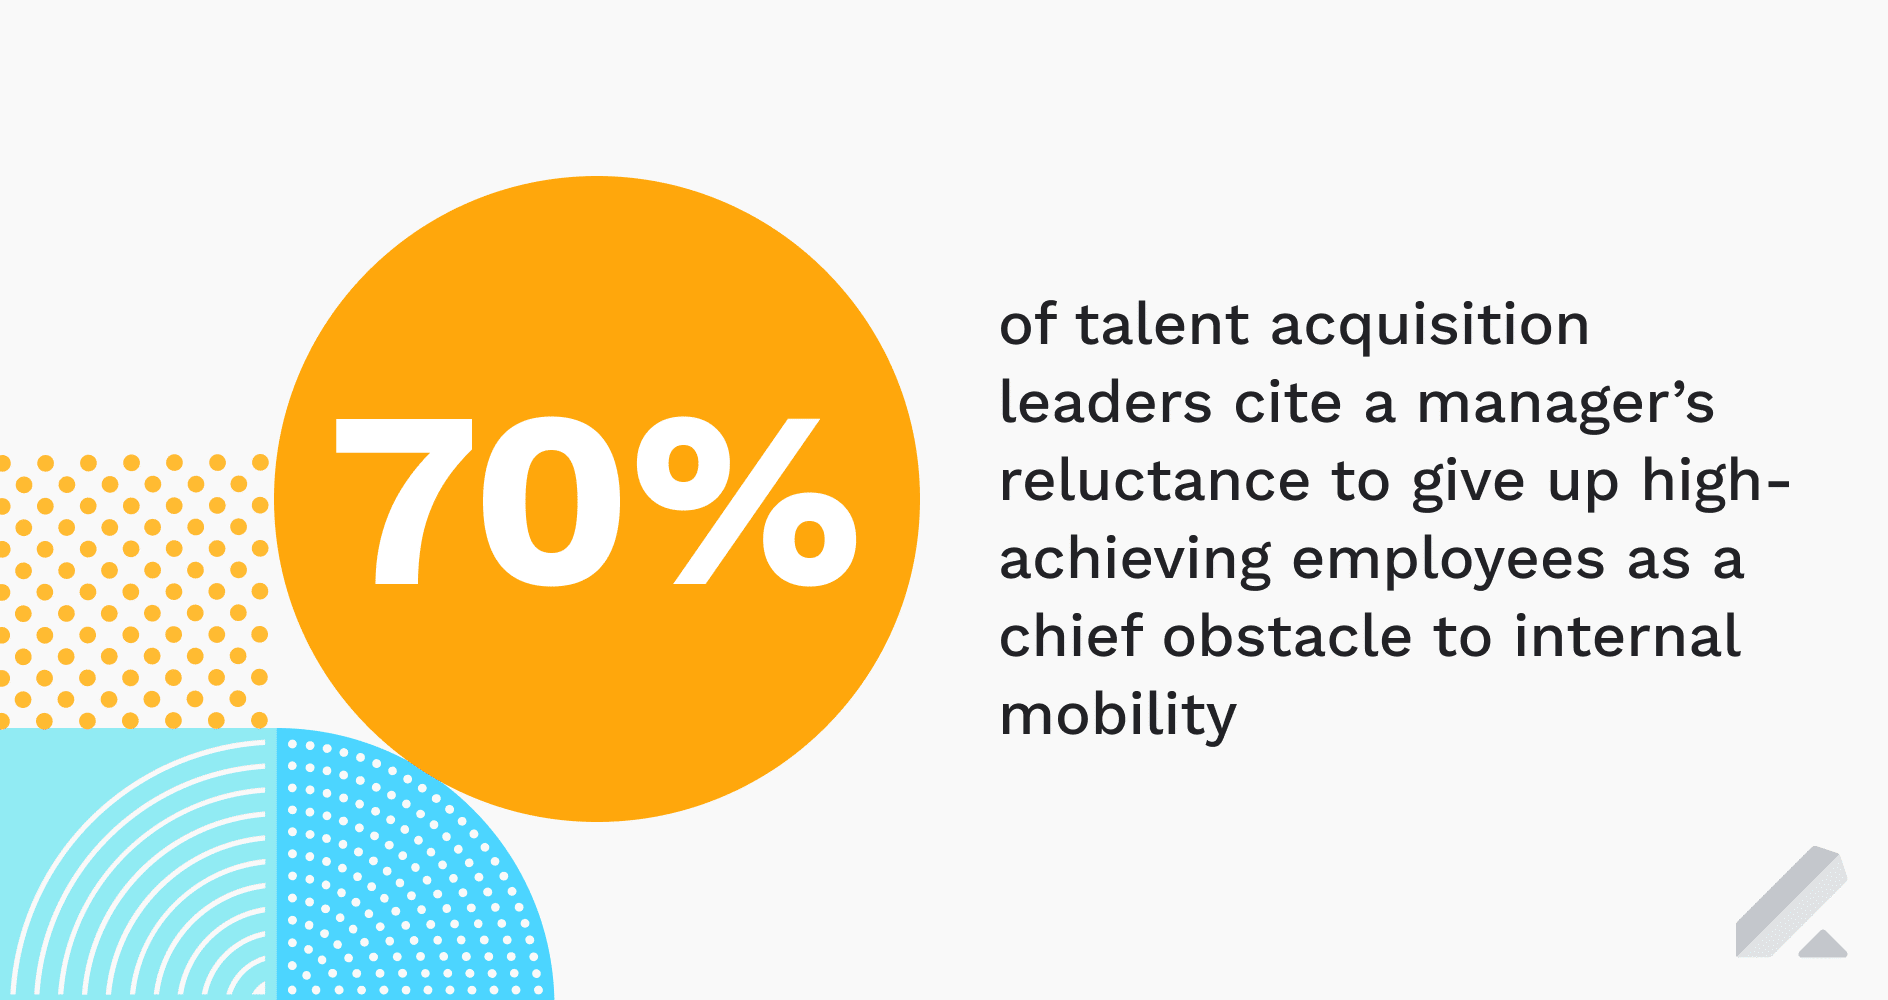 A manager's reluctance to give up high-achieving employees is an obstacle to internal mobility